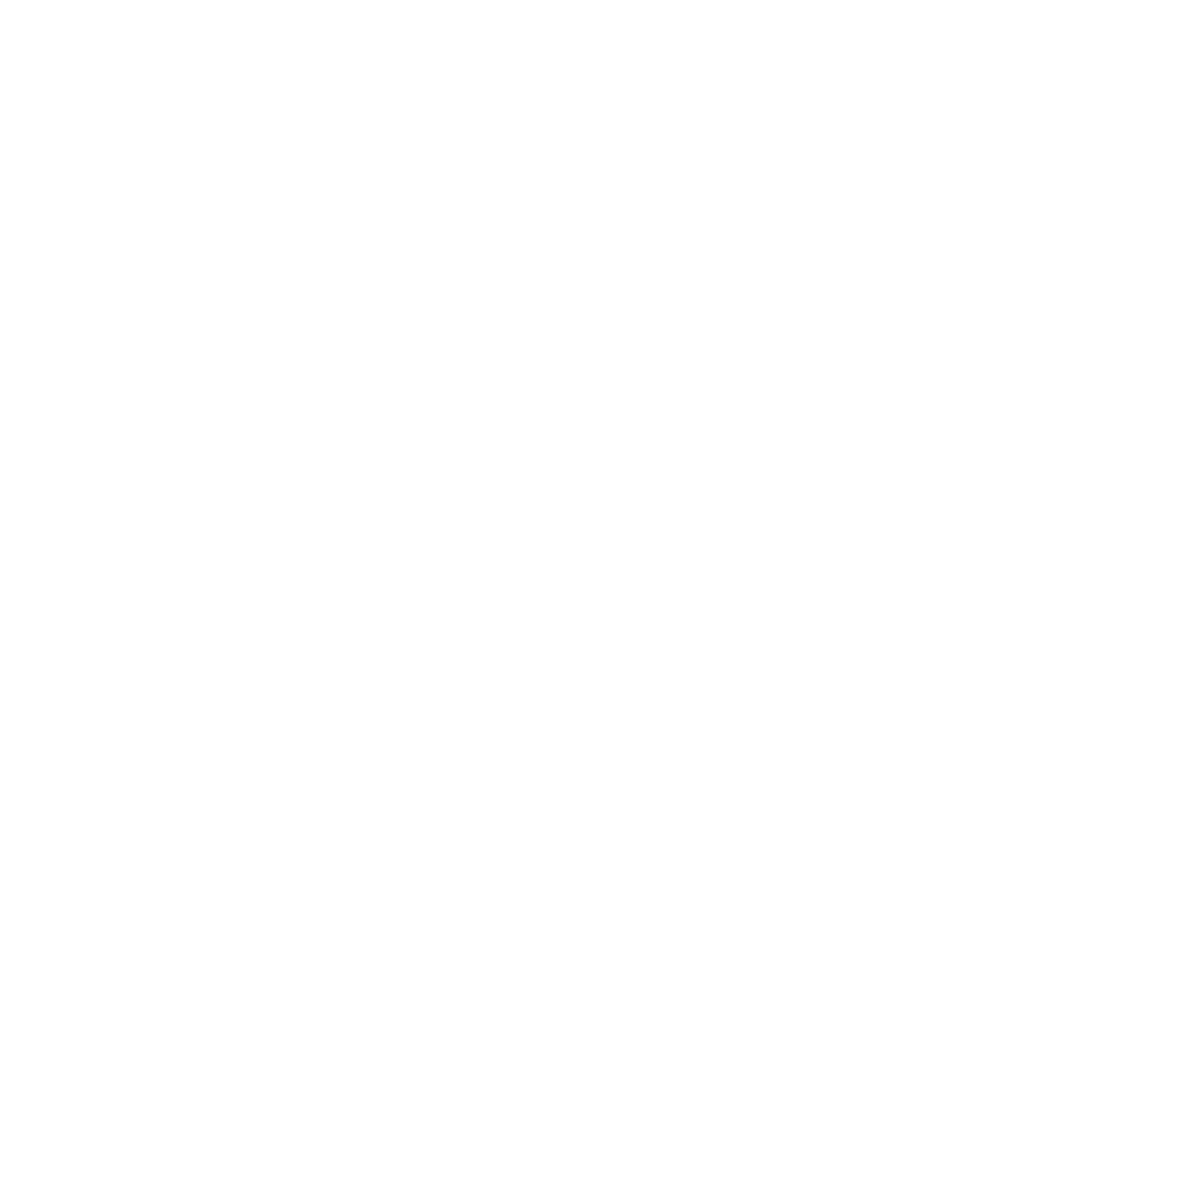 th2designs | Relaxed Luxury Interiors